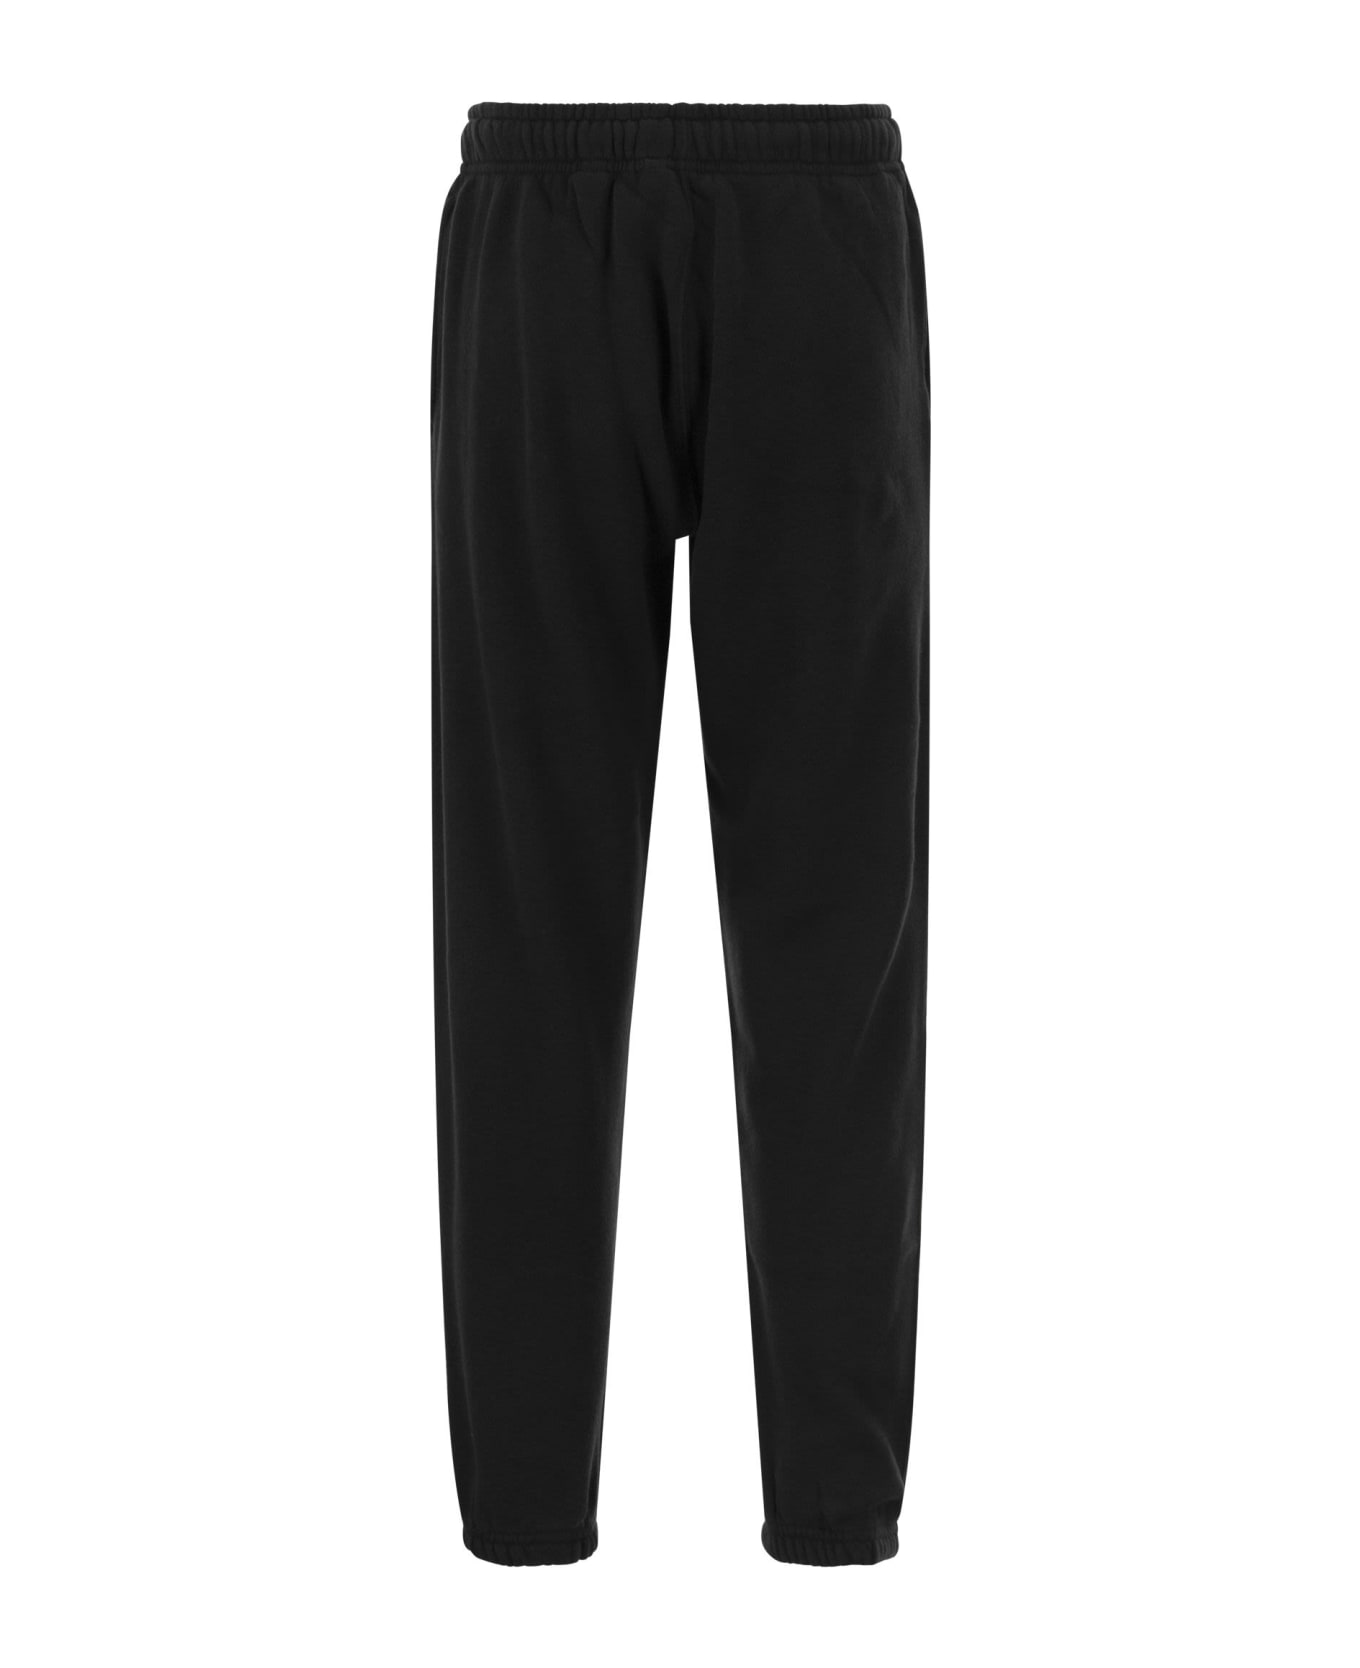 Polo Ralph Lauren Pony Embroidered Track Pants - Black